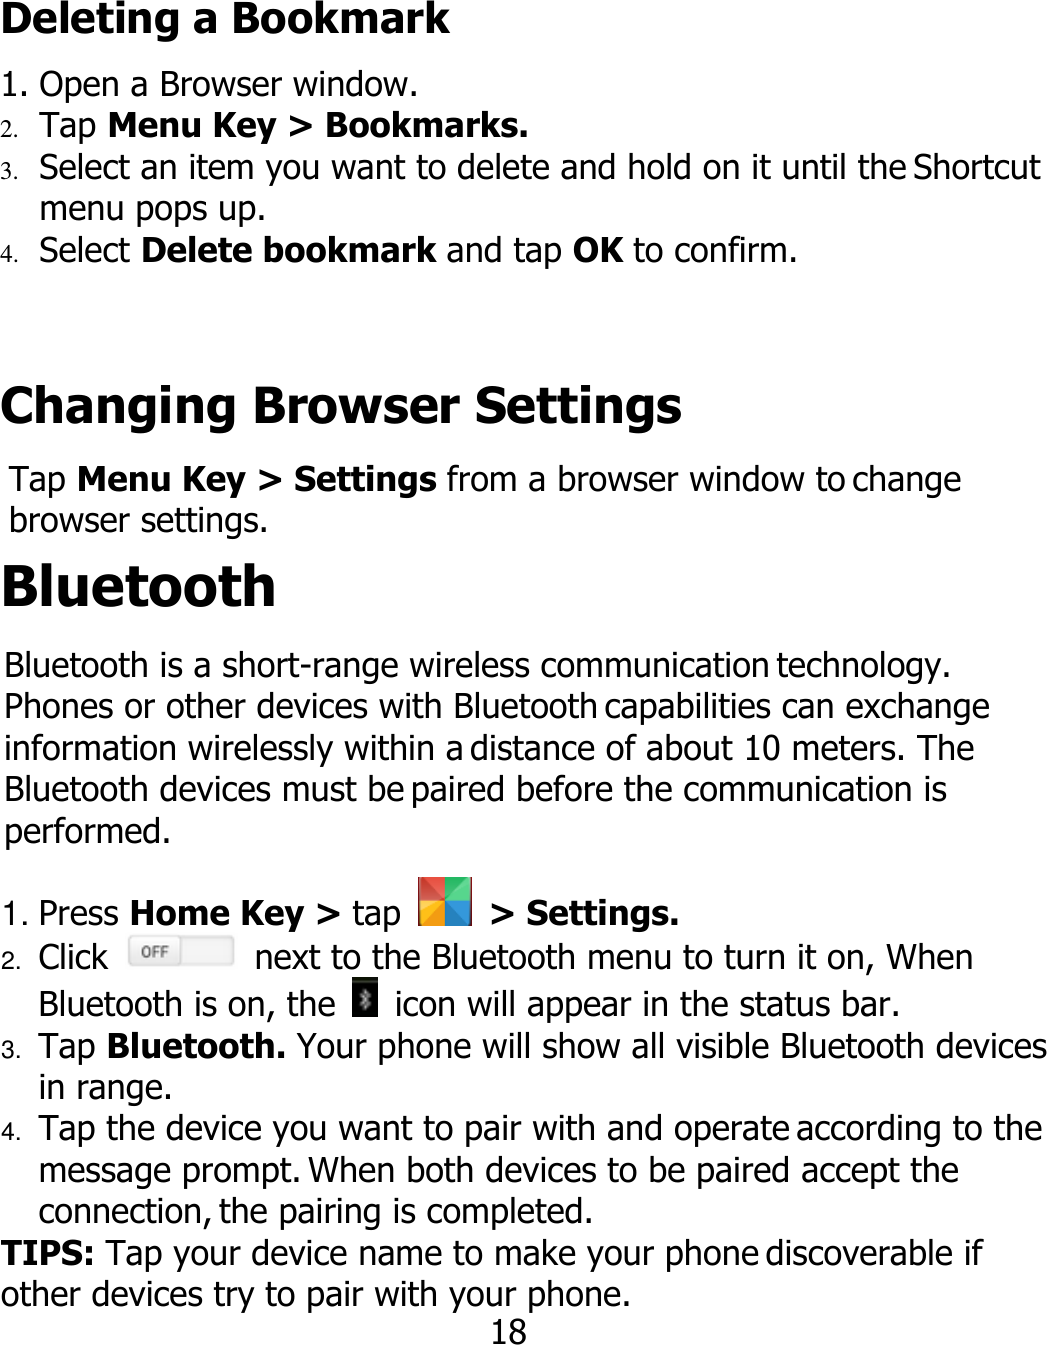 Deleting a Bookmark 1. Open a Browser window. 2. Tap Menu Key &gt; Bookmarks. 3. Select an item you want to delete and hold on it until the Shortcut menu pops up. 4. Select Delete bookmark and tap OK to confirm. Changing Browser Settings Tap Menu Key &gt; Settings from a browser window to change browser settings. Bluetooth Bluetooth is a short-range wireless communication technology. Phones or other devices with Bluetooth capabilities can exchange information wirelessly within a distance of about 10 meters. The Bluetooth devices must be paired before the communication is performed. 1. Press Home Key &gt; tap    &gt; Settings. 2. Click    next to the Bluetooth menu to turn it on, When Bluetooth is on, the    icon will appear in the status bar. 3. Tap Bluetooth. Your phone will show all visible Bluetooth devices in range. 4. Tap the device you want to pair with and operate according to the message prompt. When both devices to be paired accept the connection, the pairing is completed. TIPS: Tap your device name to make your phone discoverable if other devices try to pair with your phone. 18 